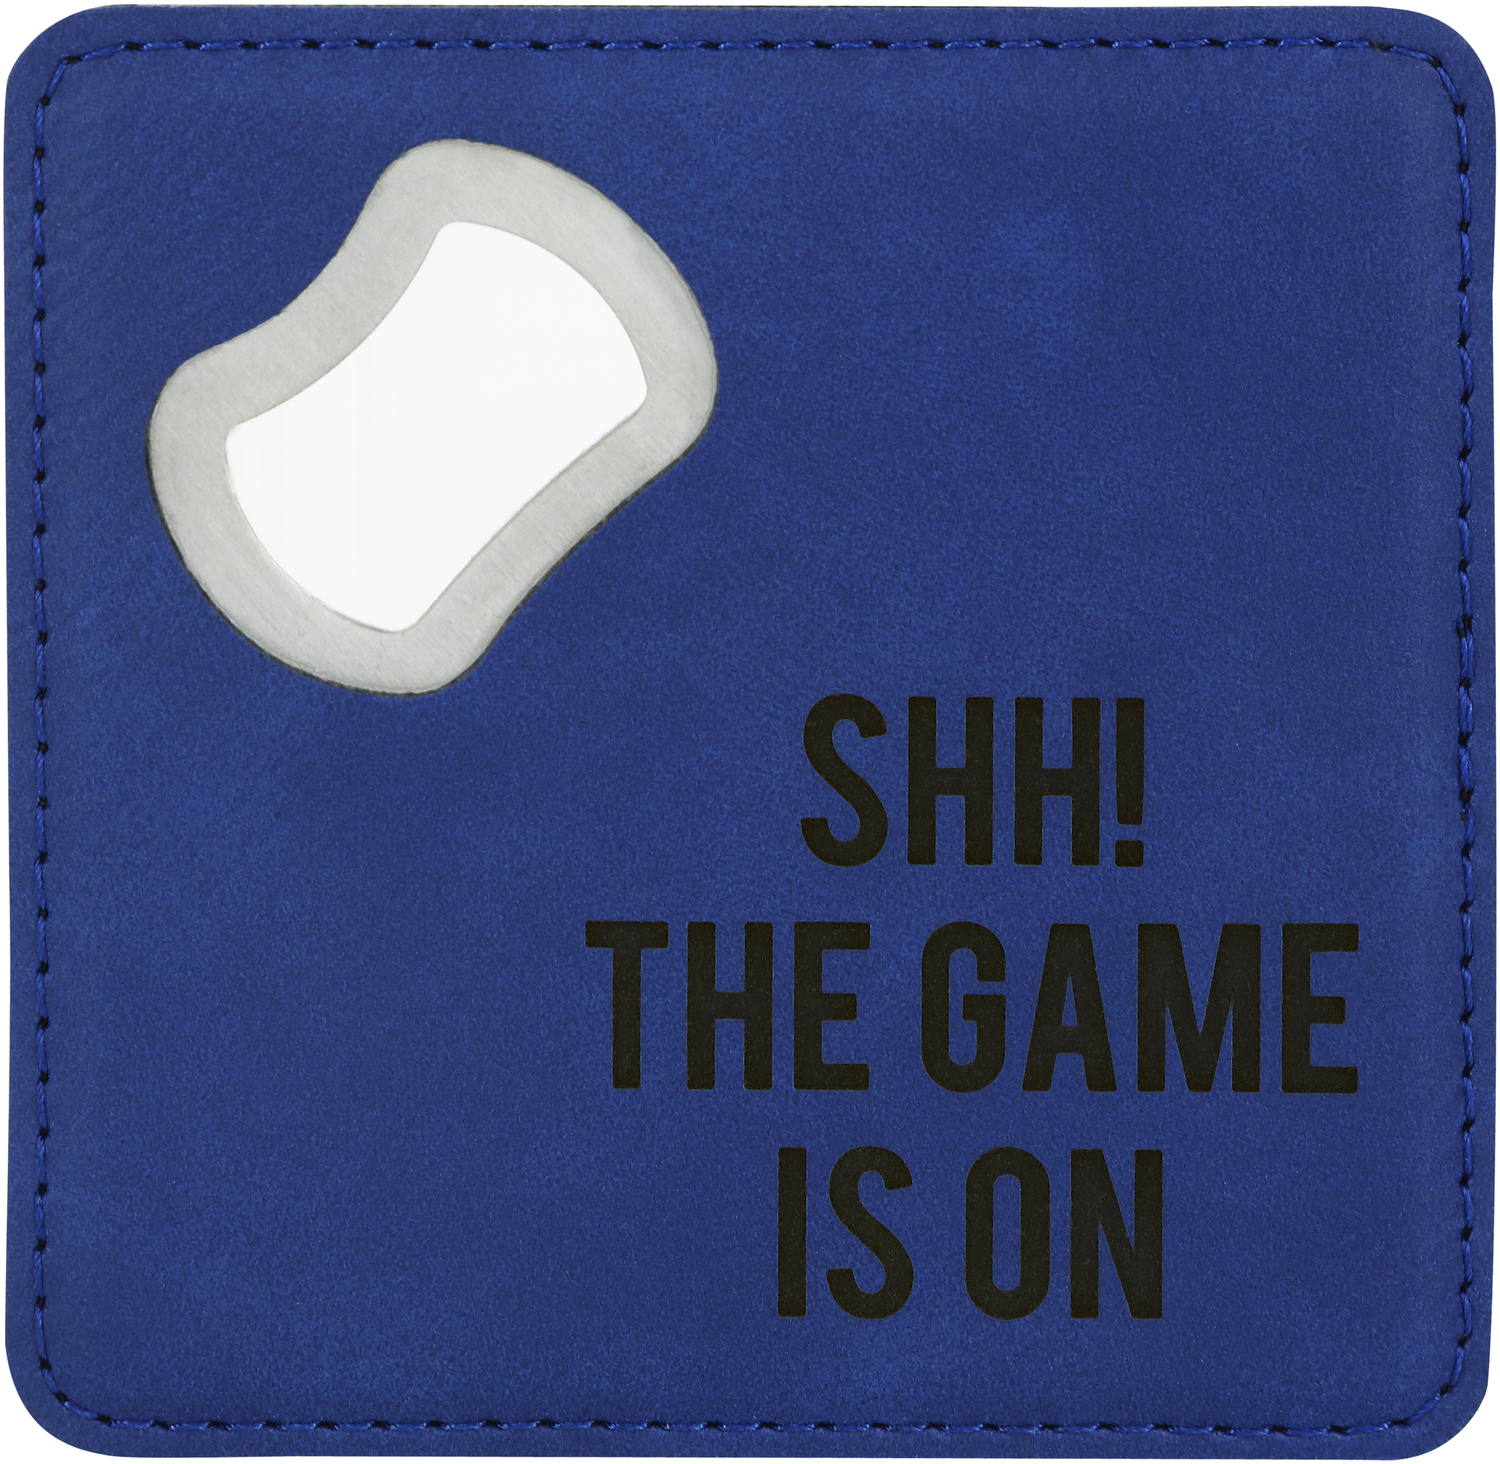 The Game by Man Made - The Game - 4" x 4" Bottle Opener Coaster